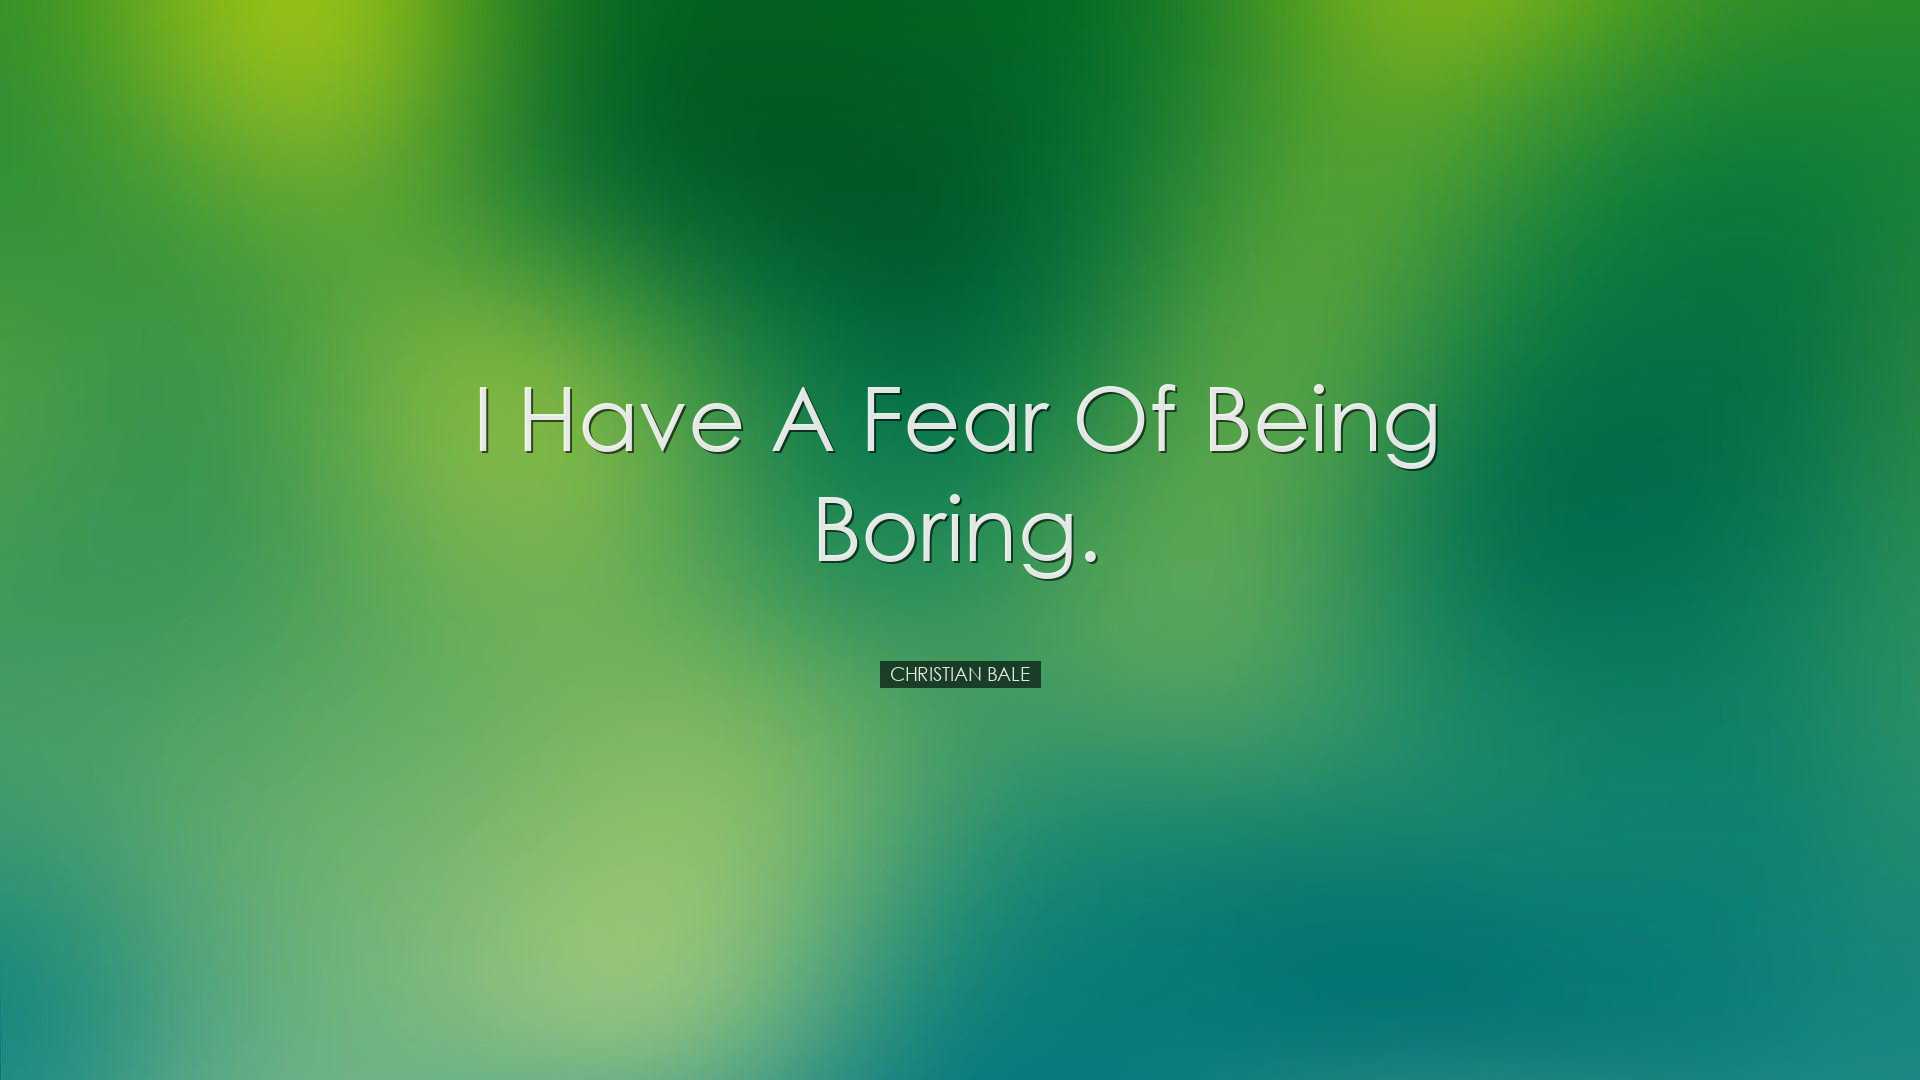 I have a fear of being boring. - Christian Bale